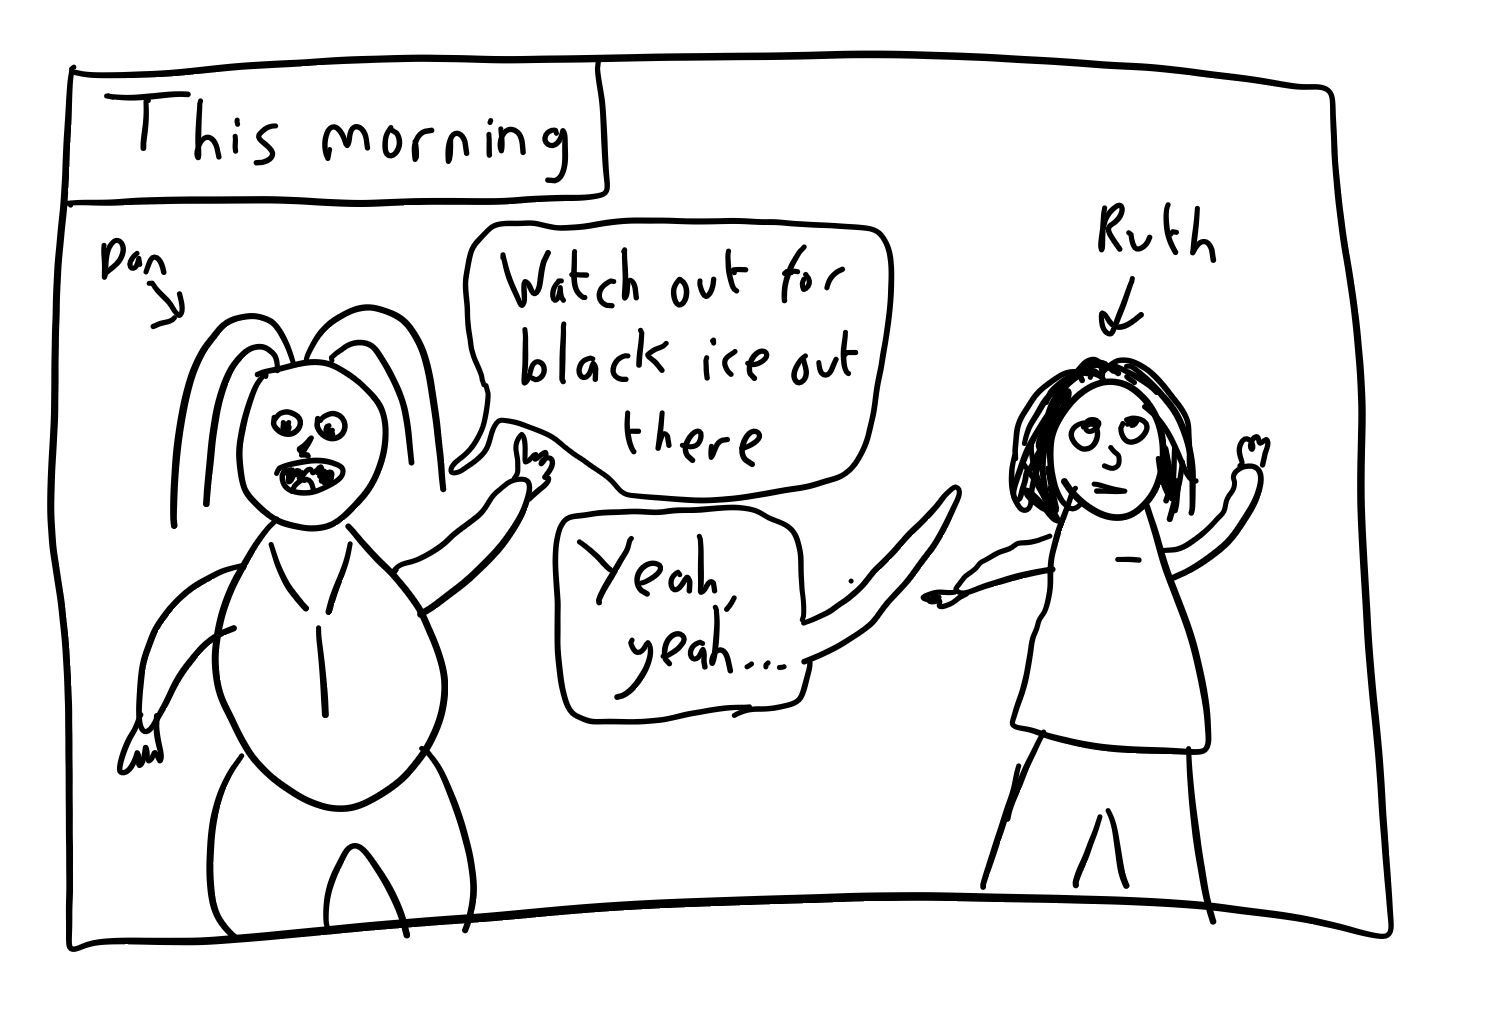 MS Paint-grade comic showing Dan warning Ruth about black ice, and Ruth being dismissive of it.